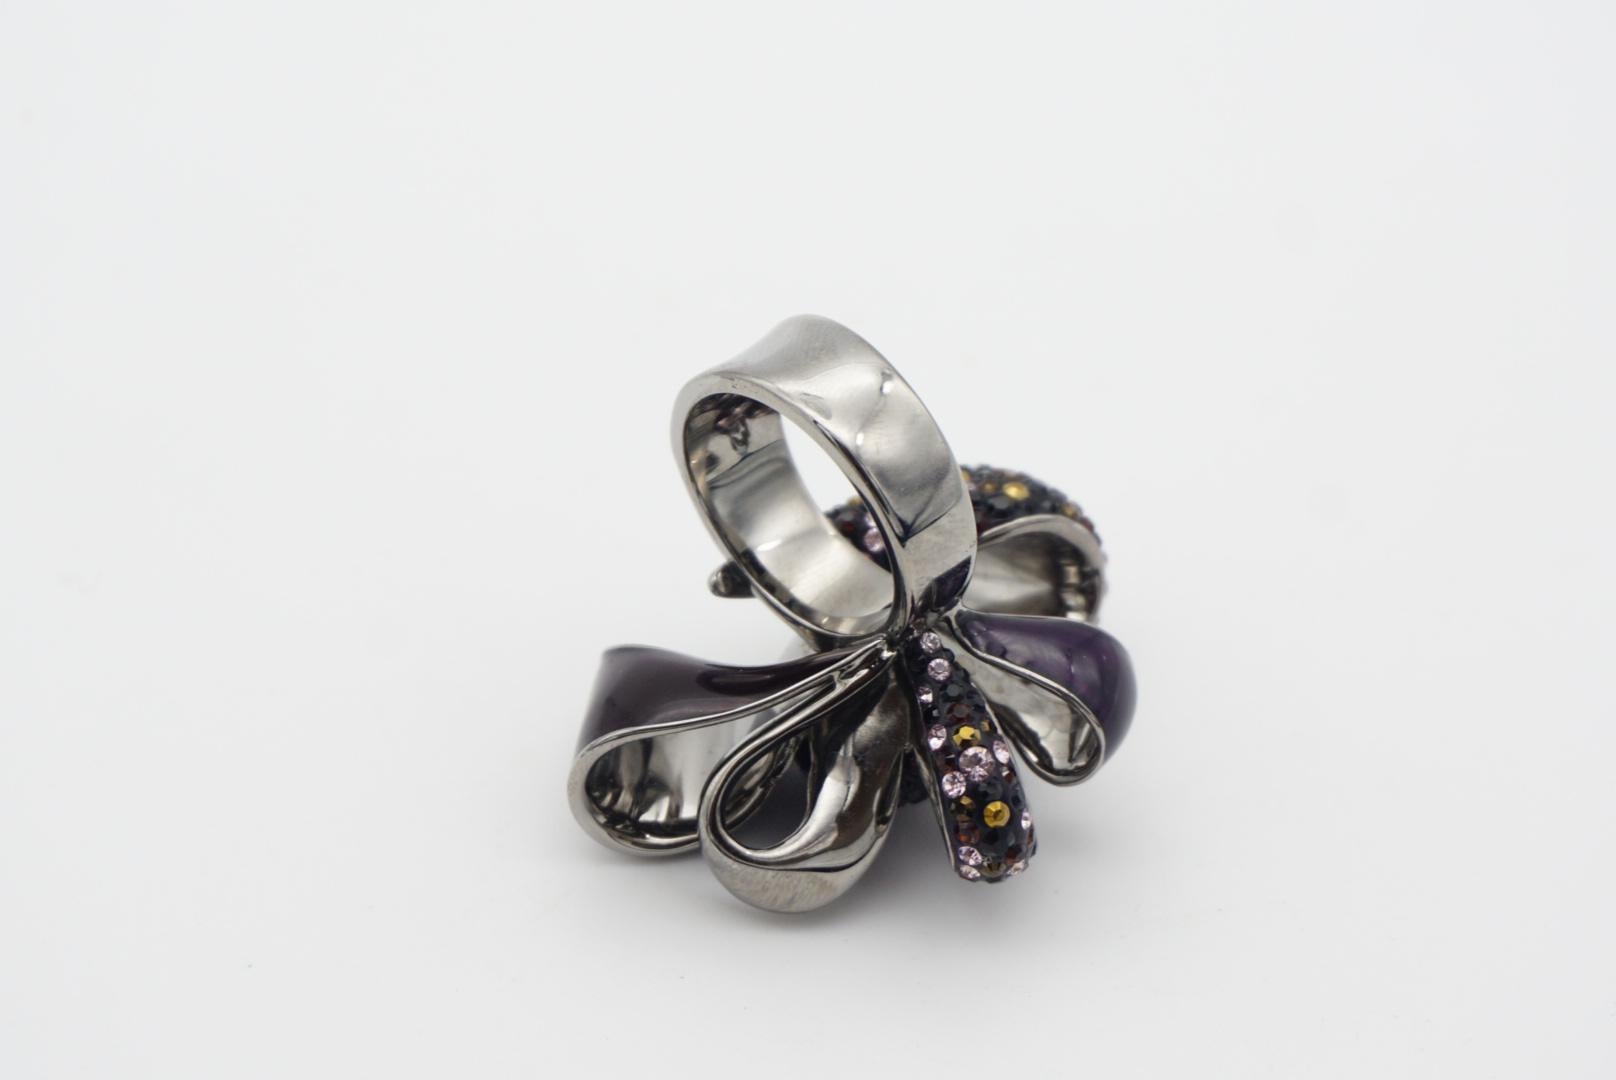 Swarovski Nirvana Cocktail Purple Flower Ribbon Bow Ring, Silver Plated, Size 52 In Excellent Condition For Sale In Wokingham, England